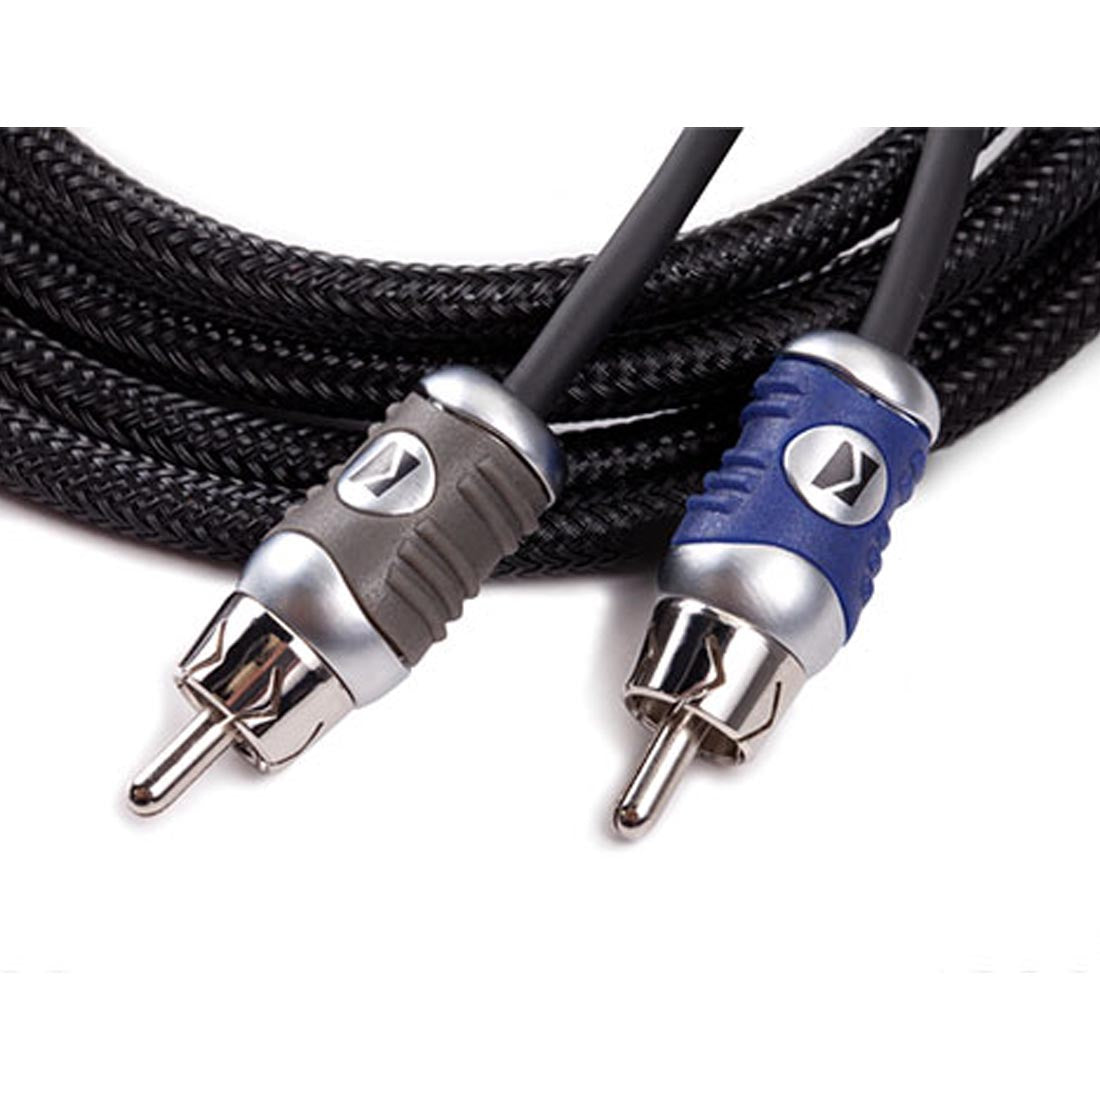 Kicker 46QI22 Q-Series Interconnect 2-Channel RCA Cable with K-Grip connectors